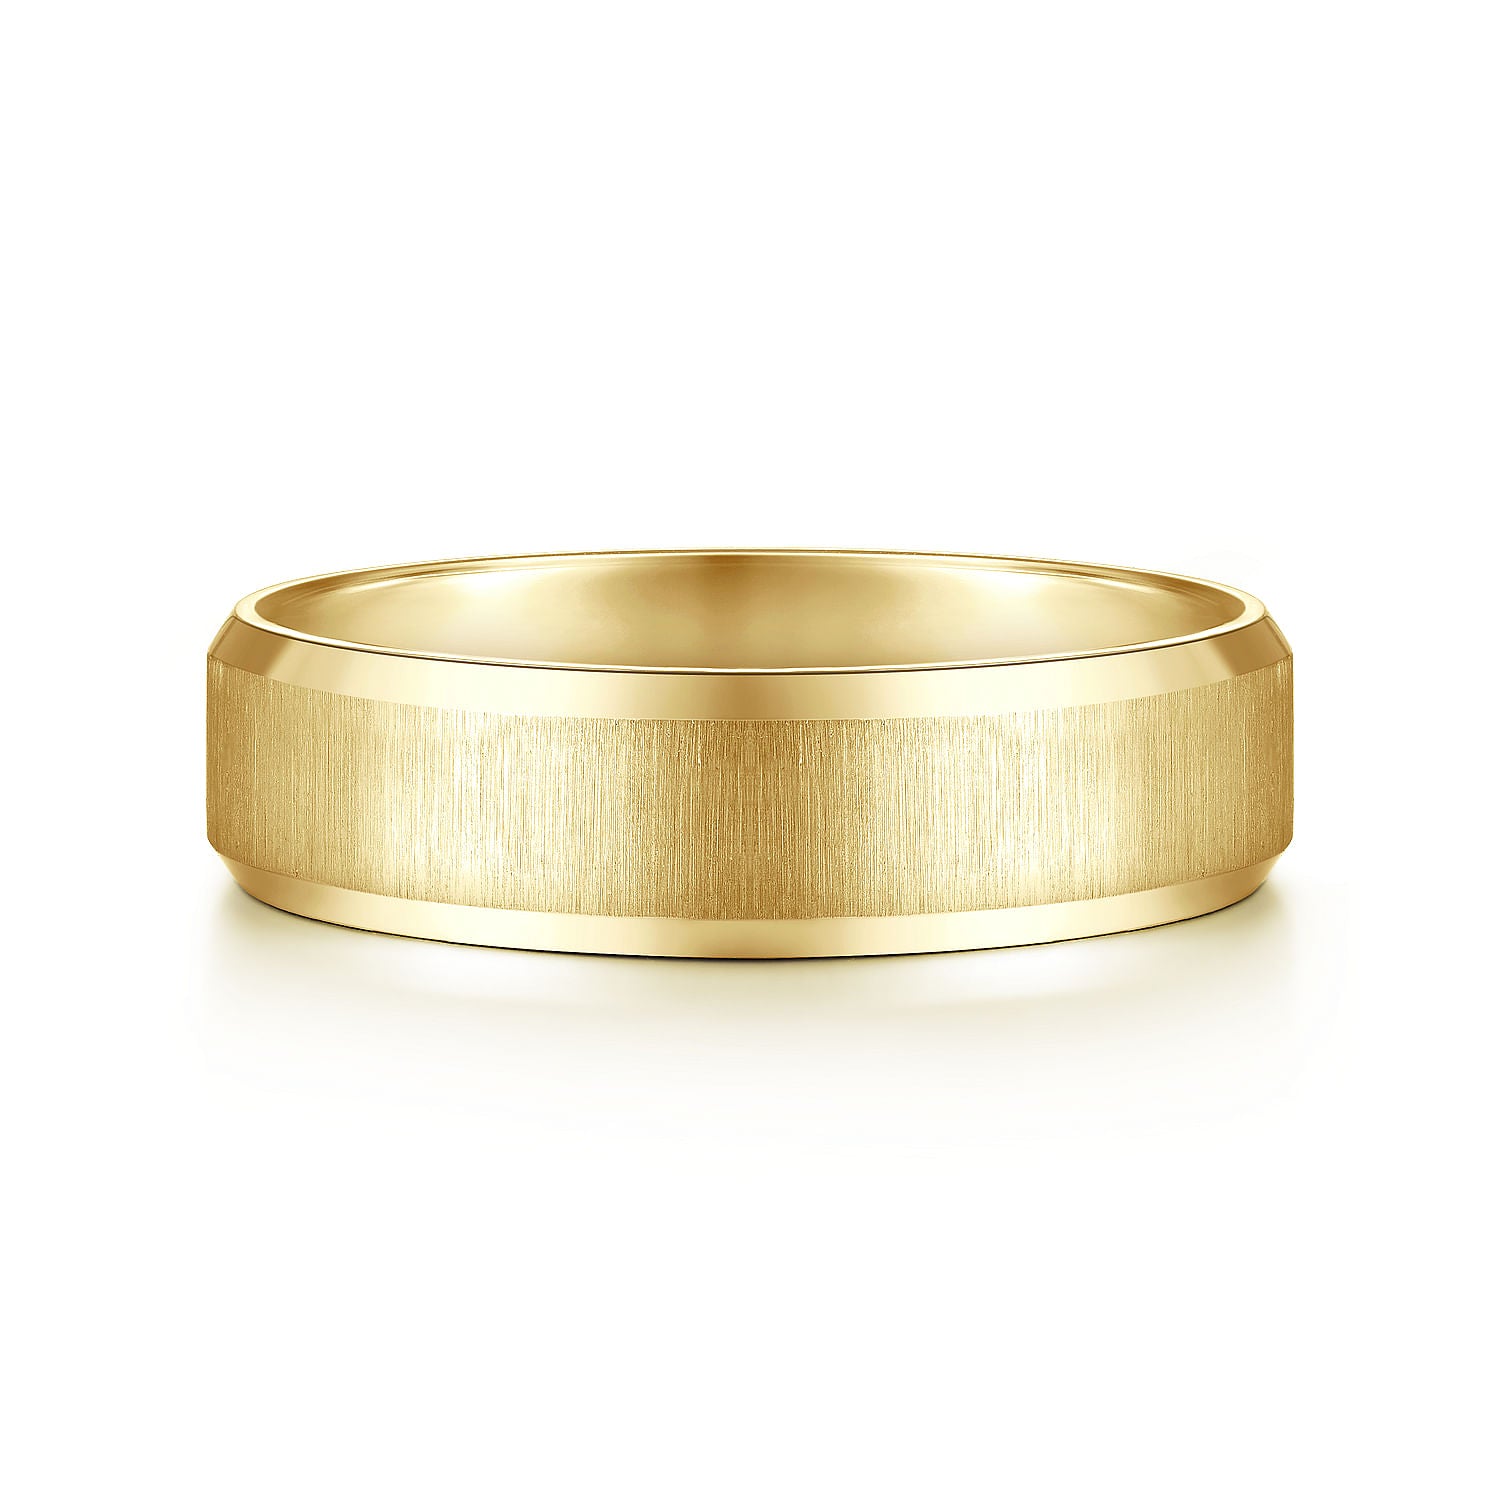 Gabriel & Co Yellow Gold Wedding Band With A Sandblast Center And Beveled Edges - Gold Wedding Bands - Men's